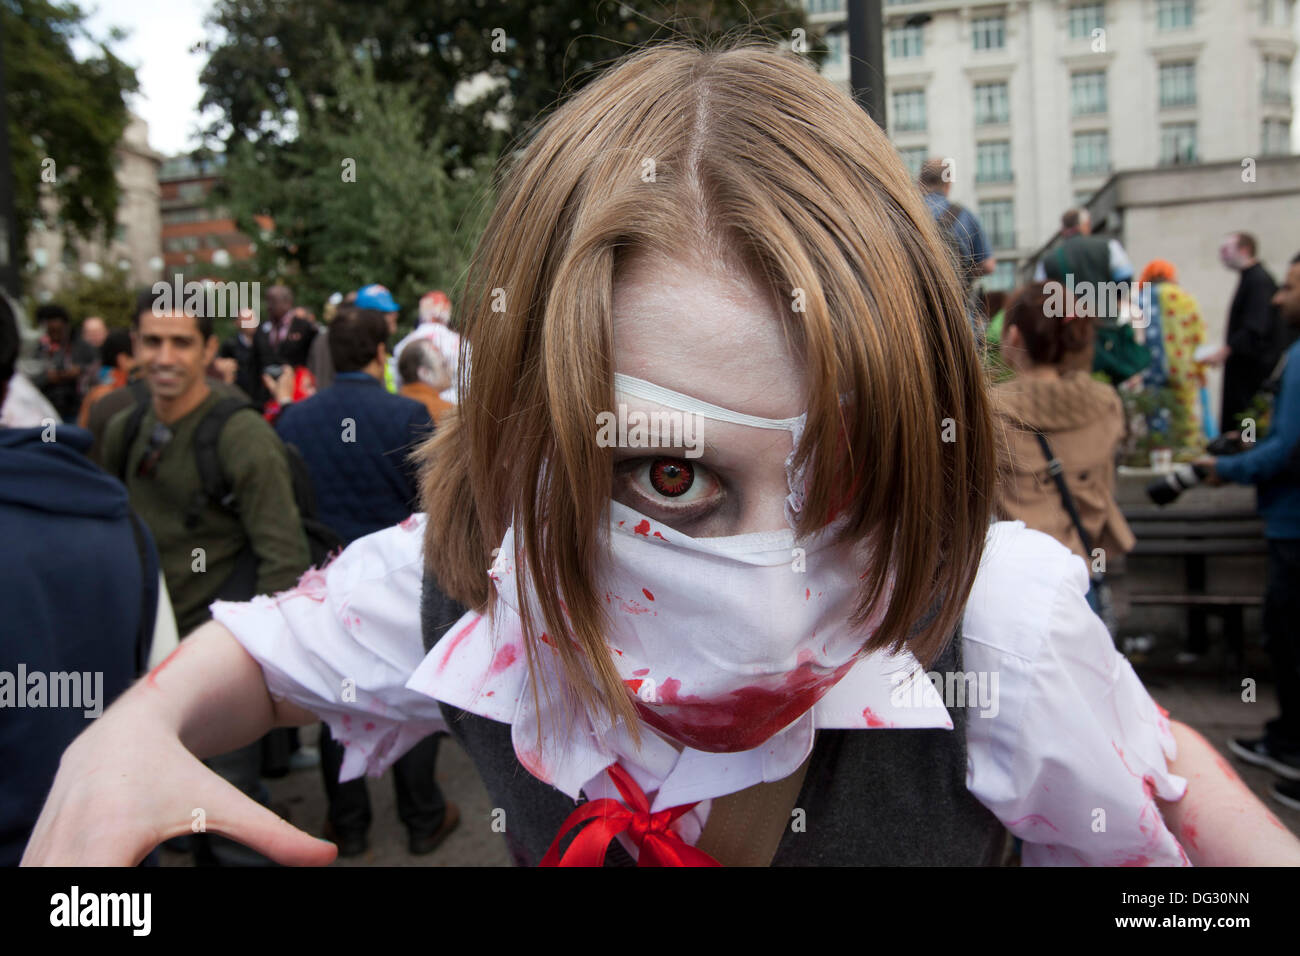 London, UK. 12th Oct 2013. London attracts thousands of zombies each year to groan and shamble through Central London in aid of the charity St. MungoÕs. Stock Photo